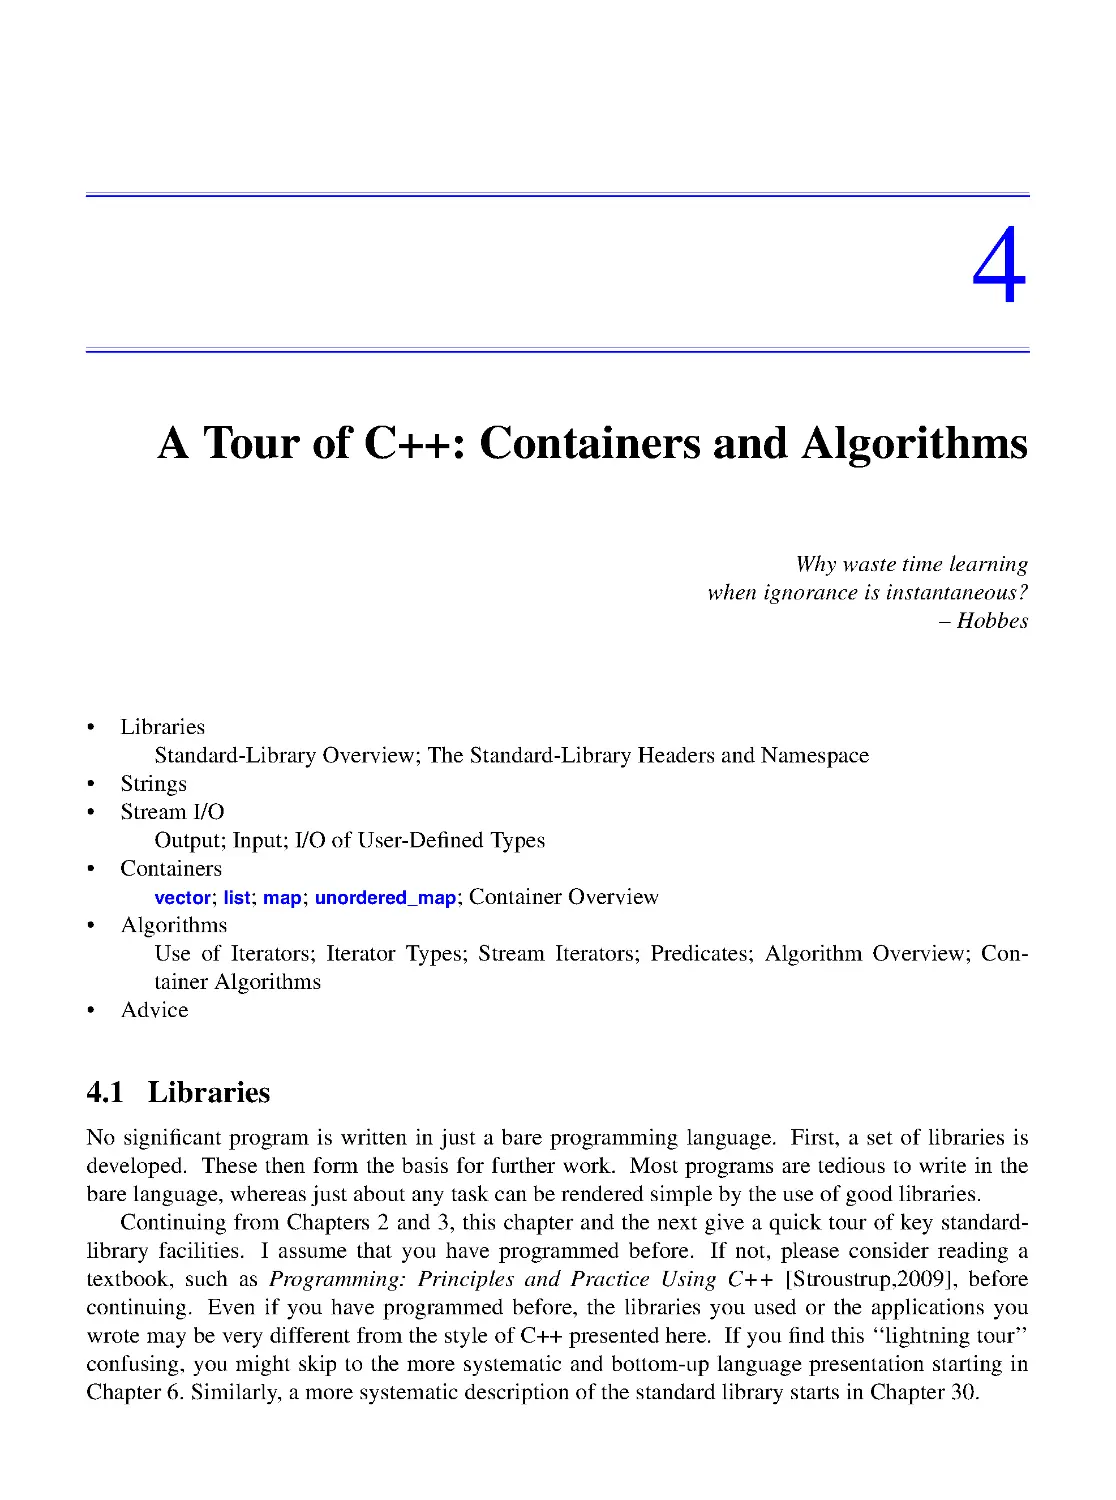 4. A Tour of C++: Containers and Algorithms